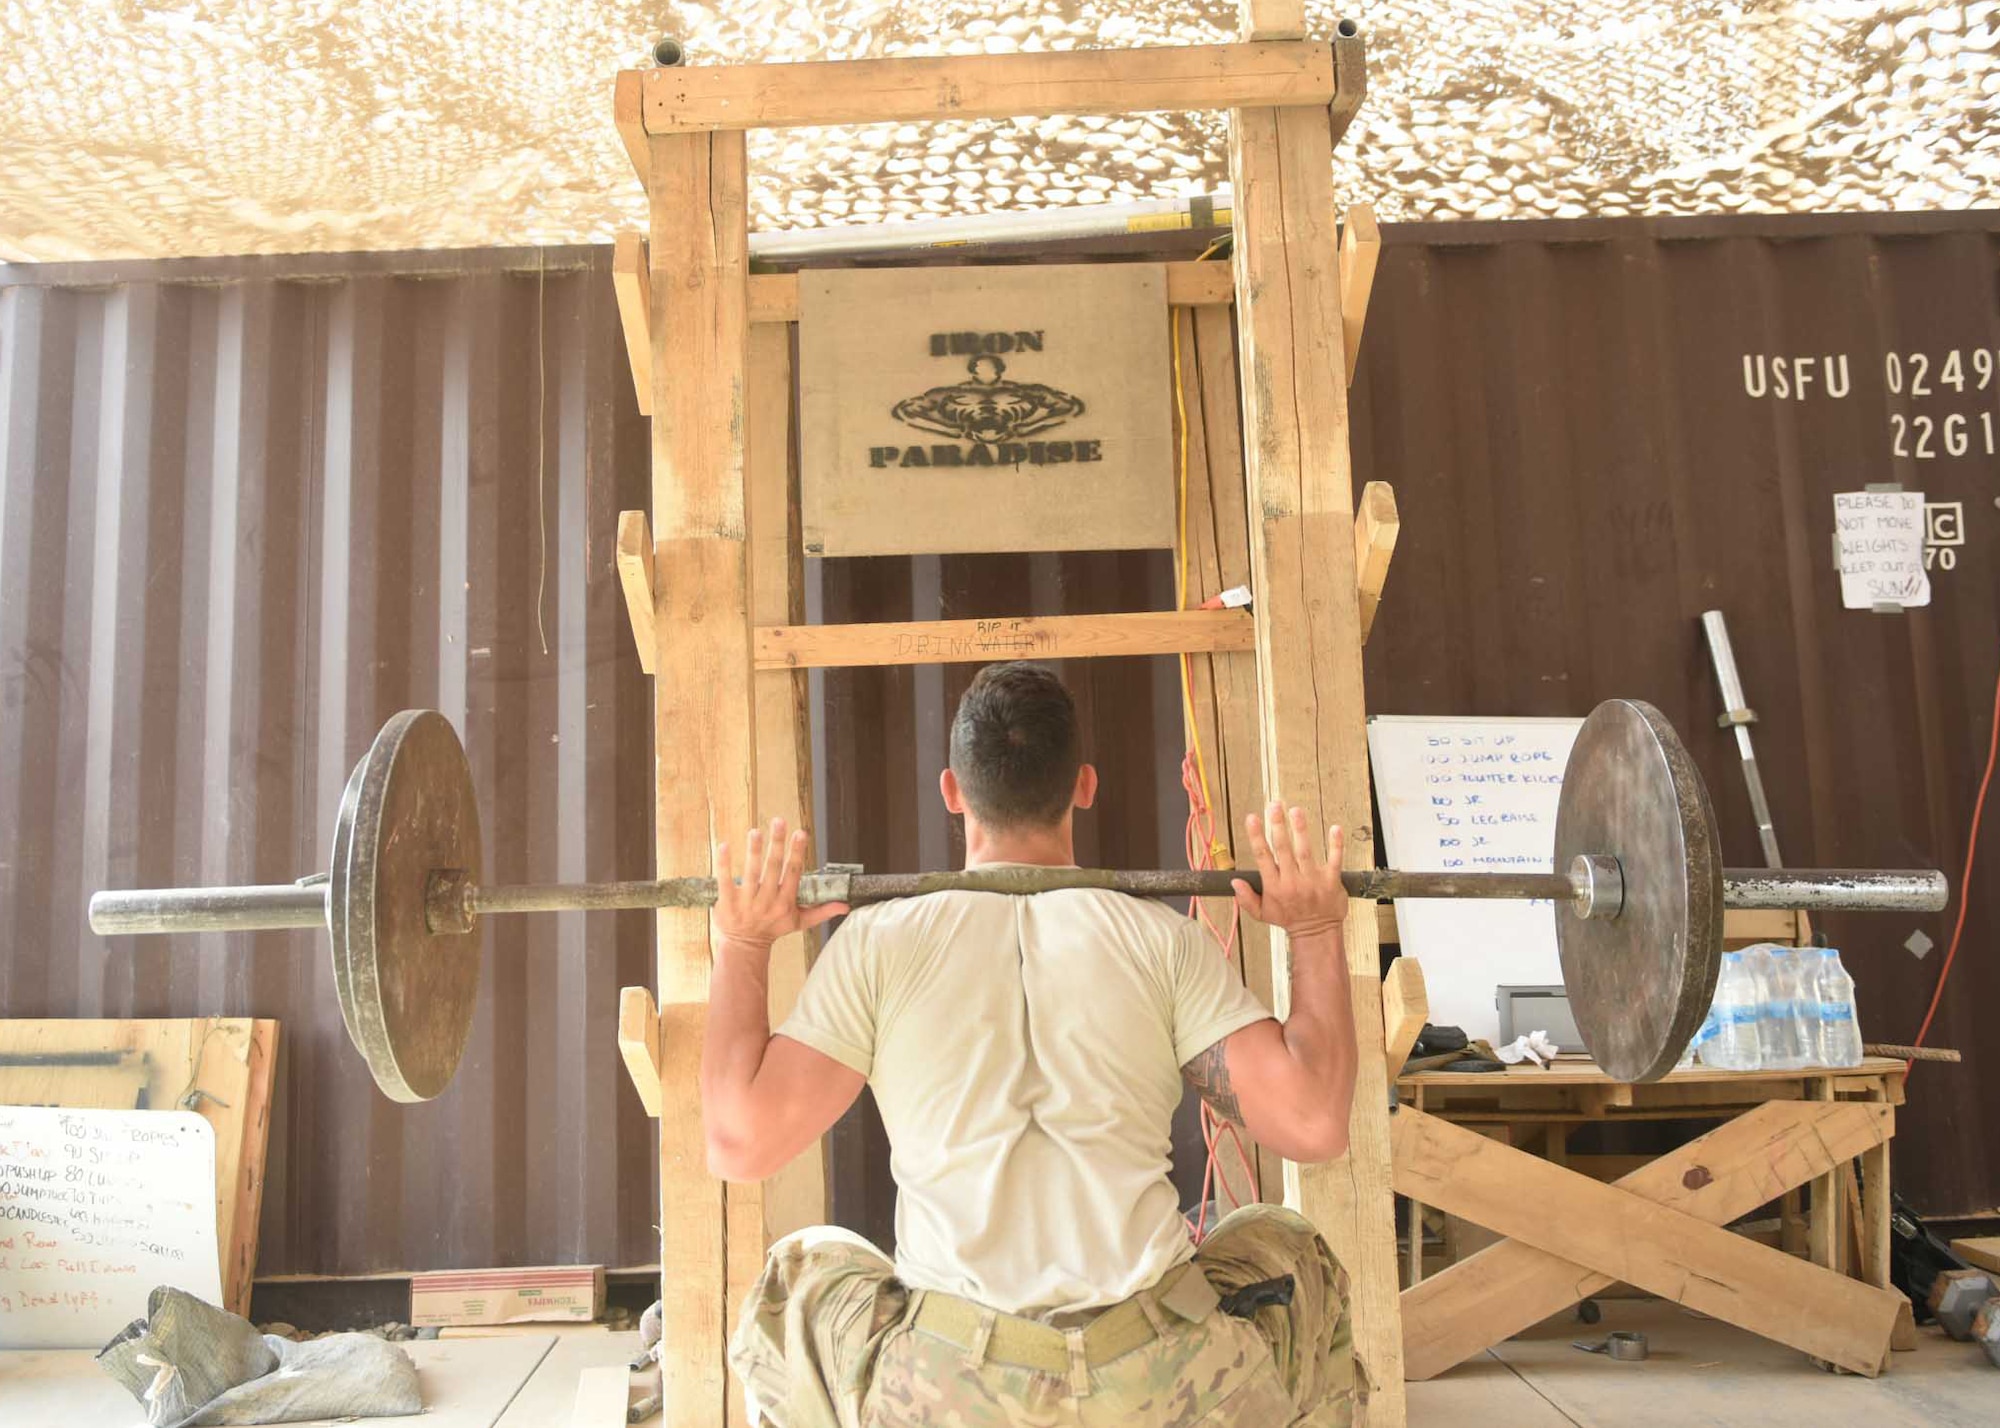 U.S. Air Force Airman 1st Class Zachary Tilley, an expeditionary maintenance liaison specialist deployed in support of Combined Joint Task Force – Operation Inherent Resolve and assigned to the 370th Air Expeditionary Advisory Group, Detachment 1, performs a barbell squat in front of a makeshift squat rack in the 370th AEAG detachment’s “Iron Paradise” gym at Qayyarah West Airfield, Iraq, July 2, 2017. The air advisors built the “Iron Paradise” gym, which includes a makeshift squat rack, bench press, preacher curl bench and other recently acquired weights, creating an area often filled with Air Force and Army personnel trying to maintain physical fitness in their austere location. CJTF-OIR is the global Coalition to defeat ISIS in Iraq and Syria. (U.S. Air Force photo by Tech. Sgt. Jonathan Hehnly)